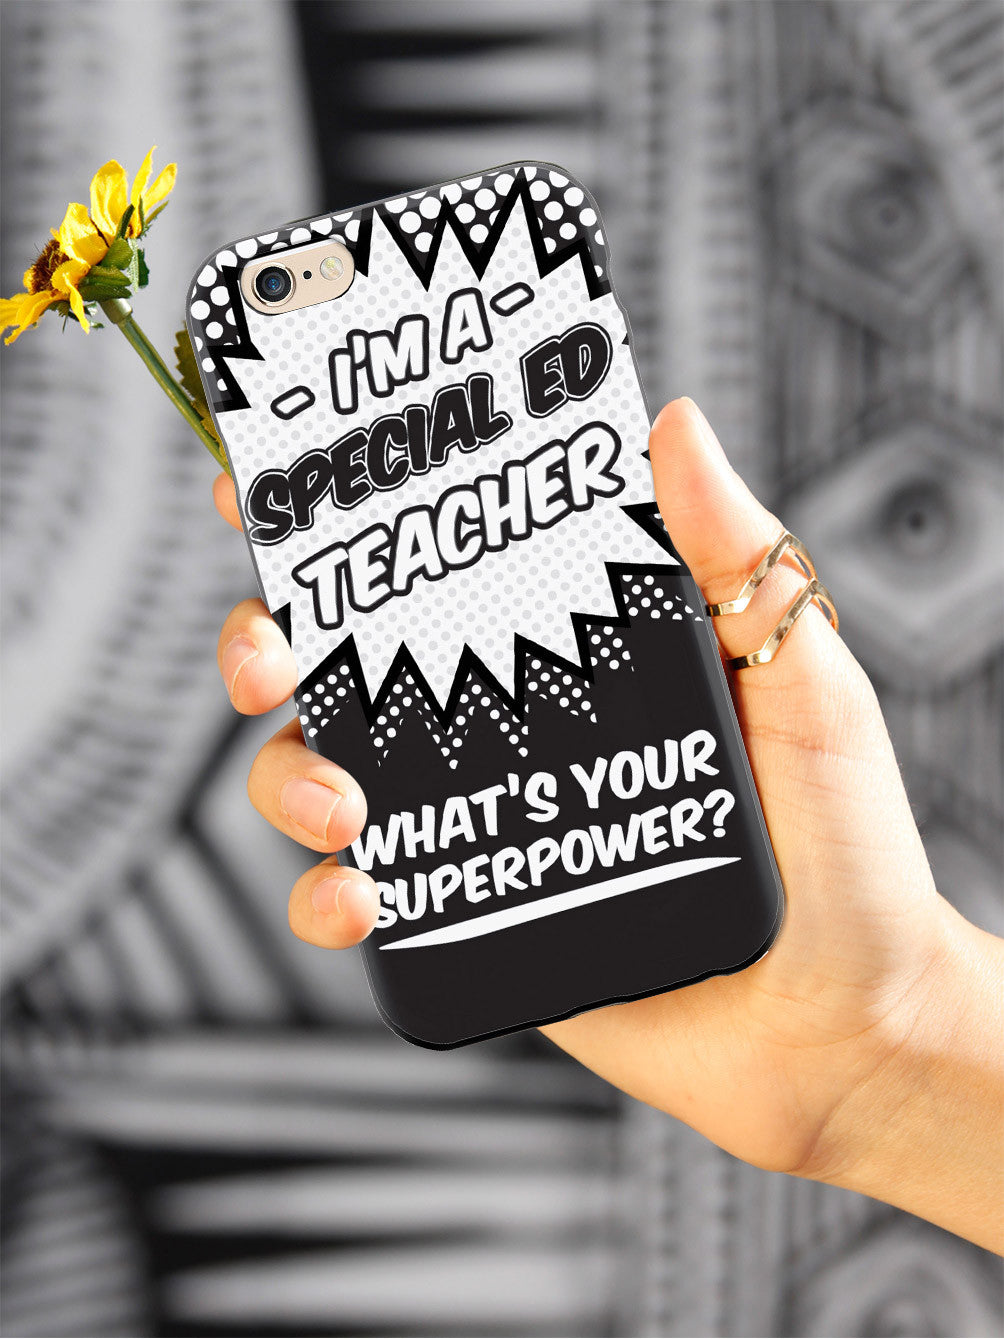 Special Ed Teacher - What's Your Superpower? Case